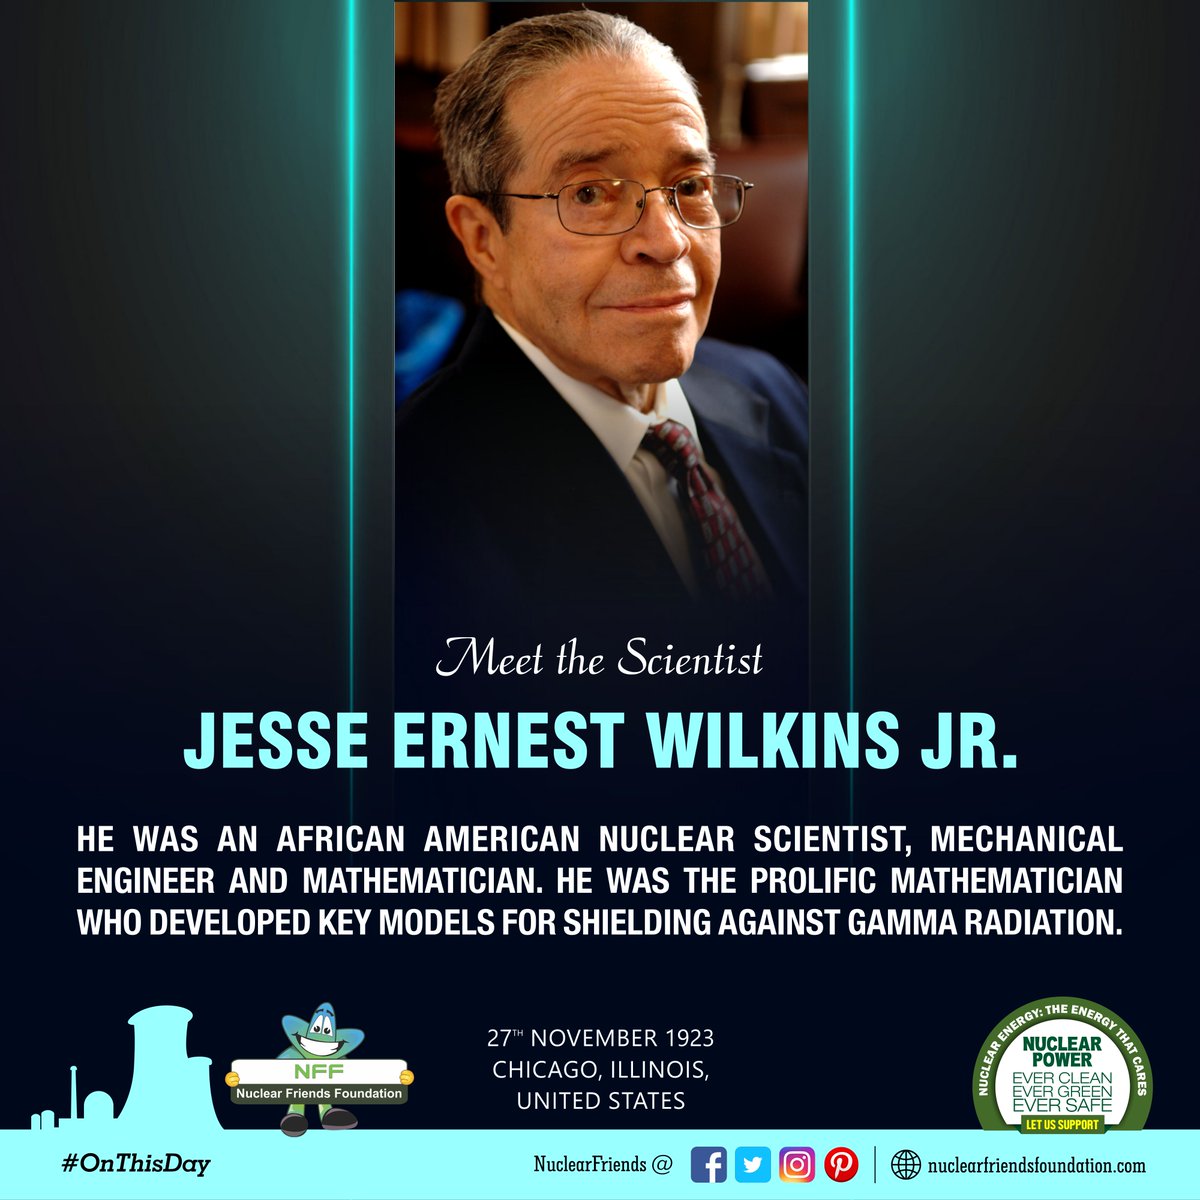 Nuclear Friends Fnd on Twitter: "#OnThisDay Meet the scientist J. Ernest Wilkins Jr! He was an African American nuclear scientist, mechanical engineer and mathematician. Reach us @ https://t.co/2xhszfjoCx #NuclearPower #NuclearEnergy #Evergreen ...